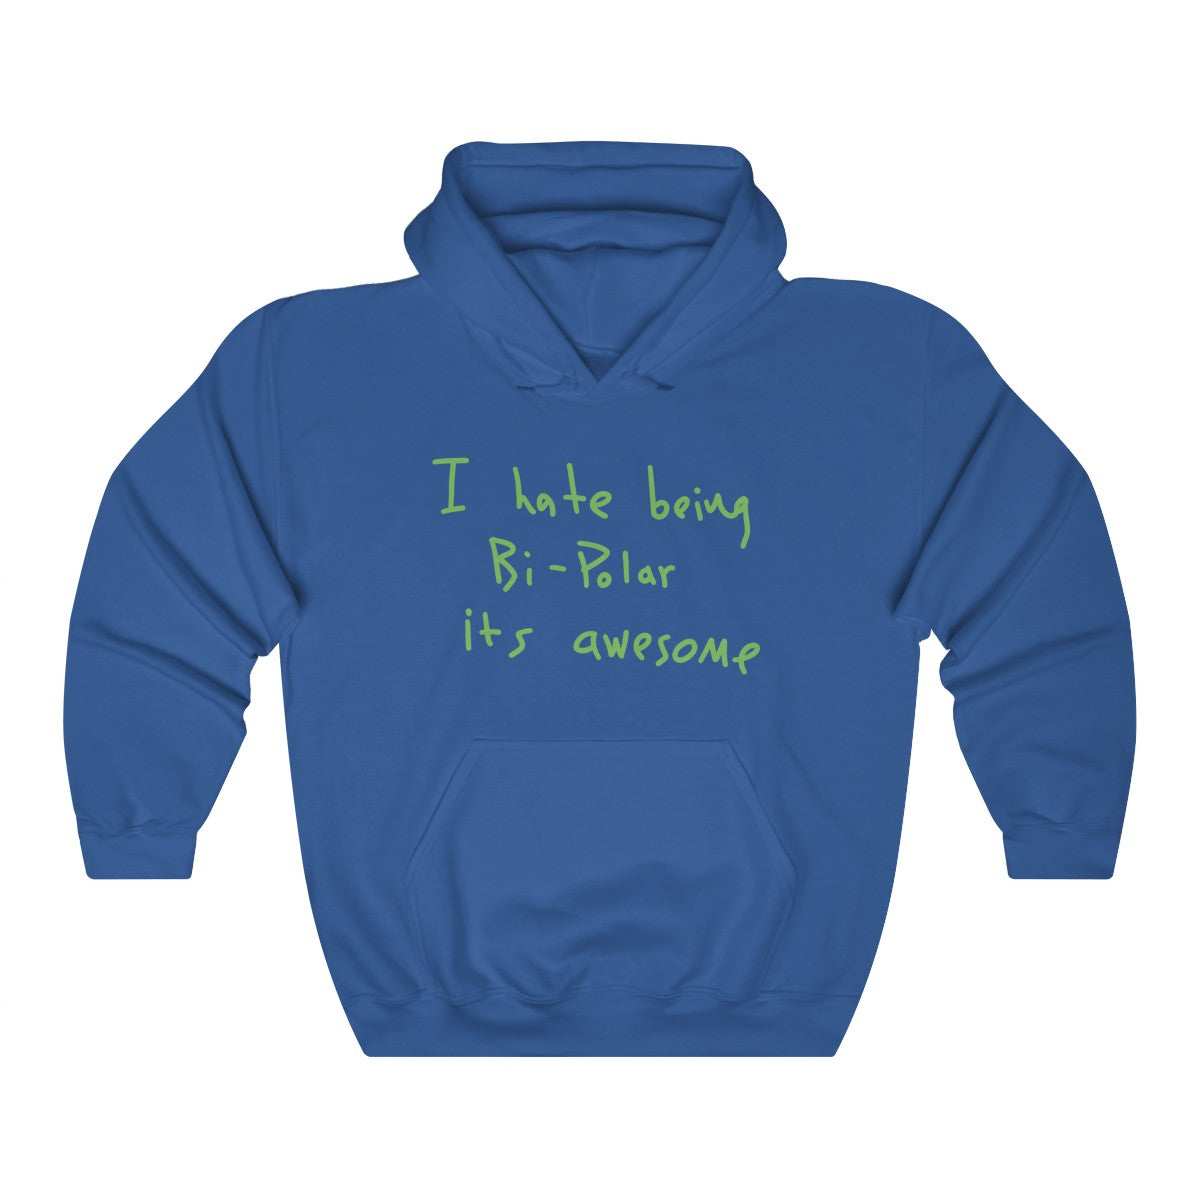 I hate being Bi-Polar it's awesome Kanye West inspired Heavy Blend™ Hoodie-Royal-S-Archethype